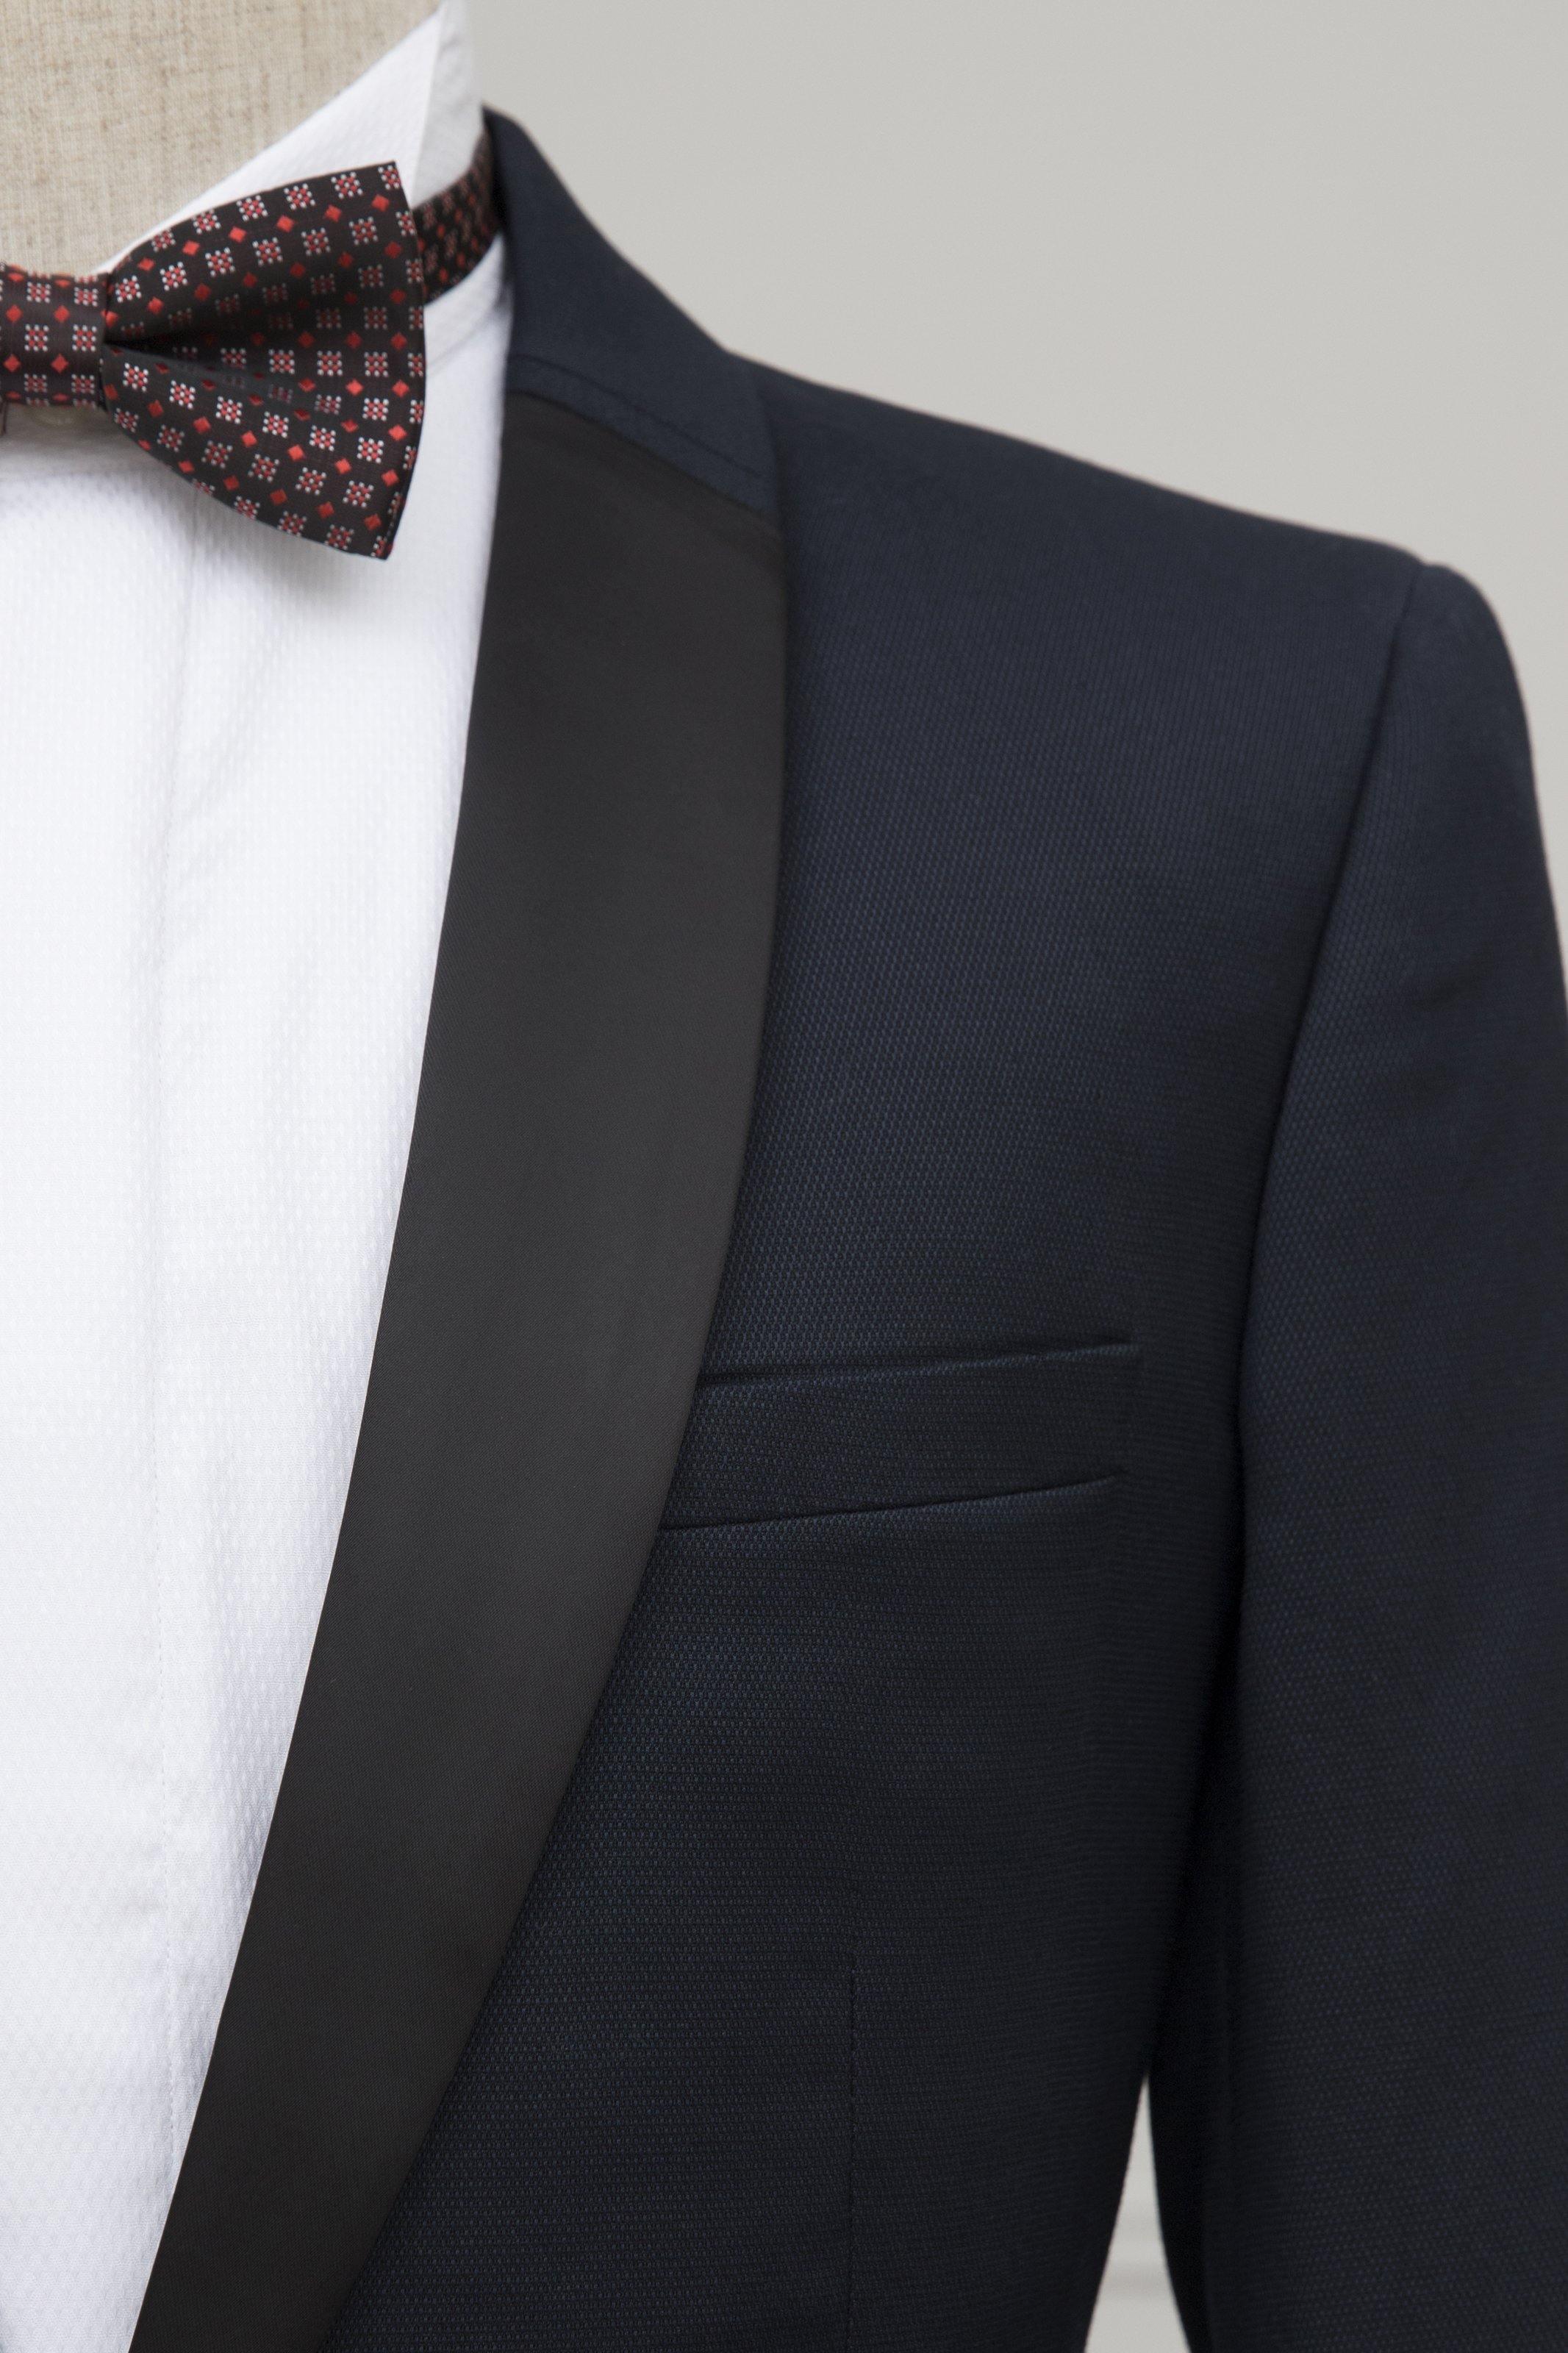 TUXEDO SUIT 1 BUTTON NAVY at Charcoal Clothing